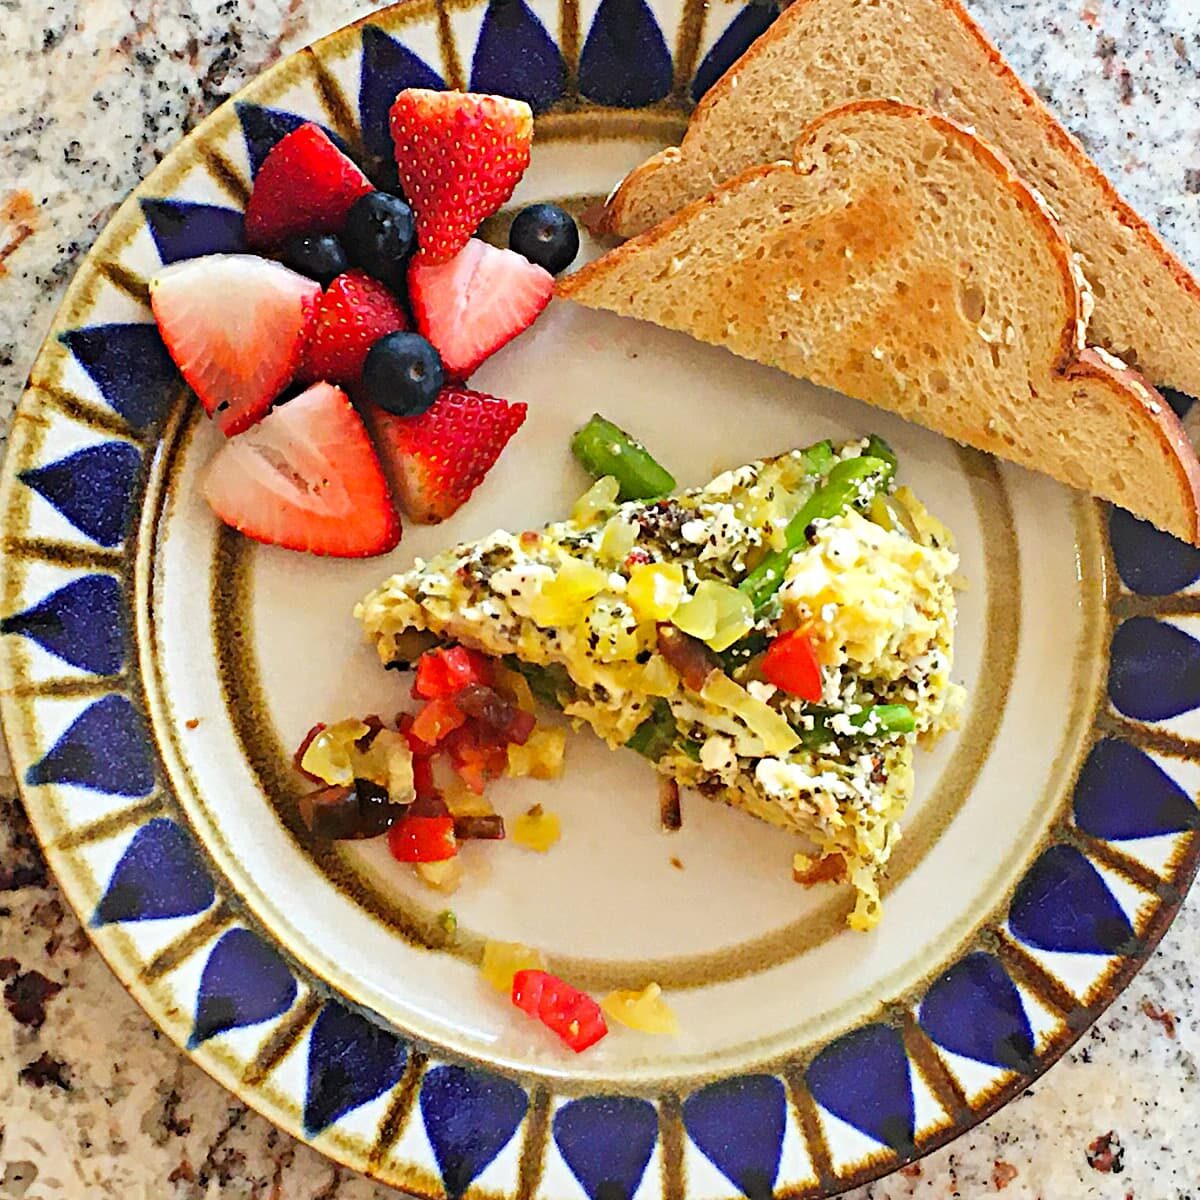 asparagus frittata with tomato relish, fresh fruit, and toast on a plate.